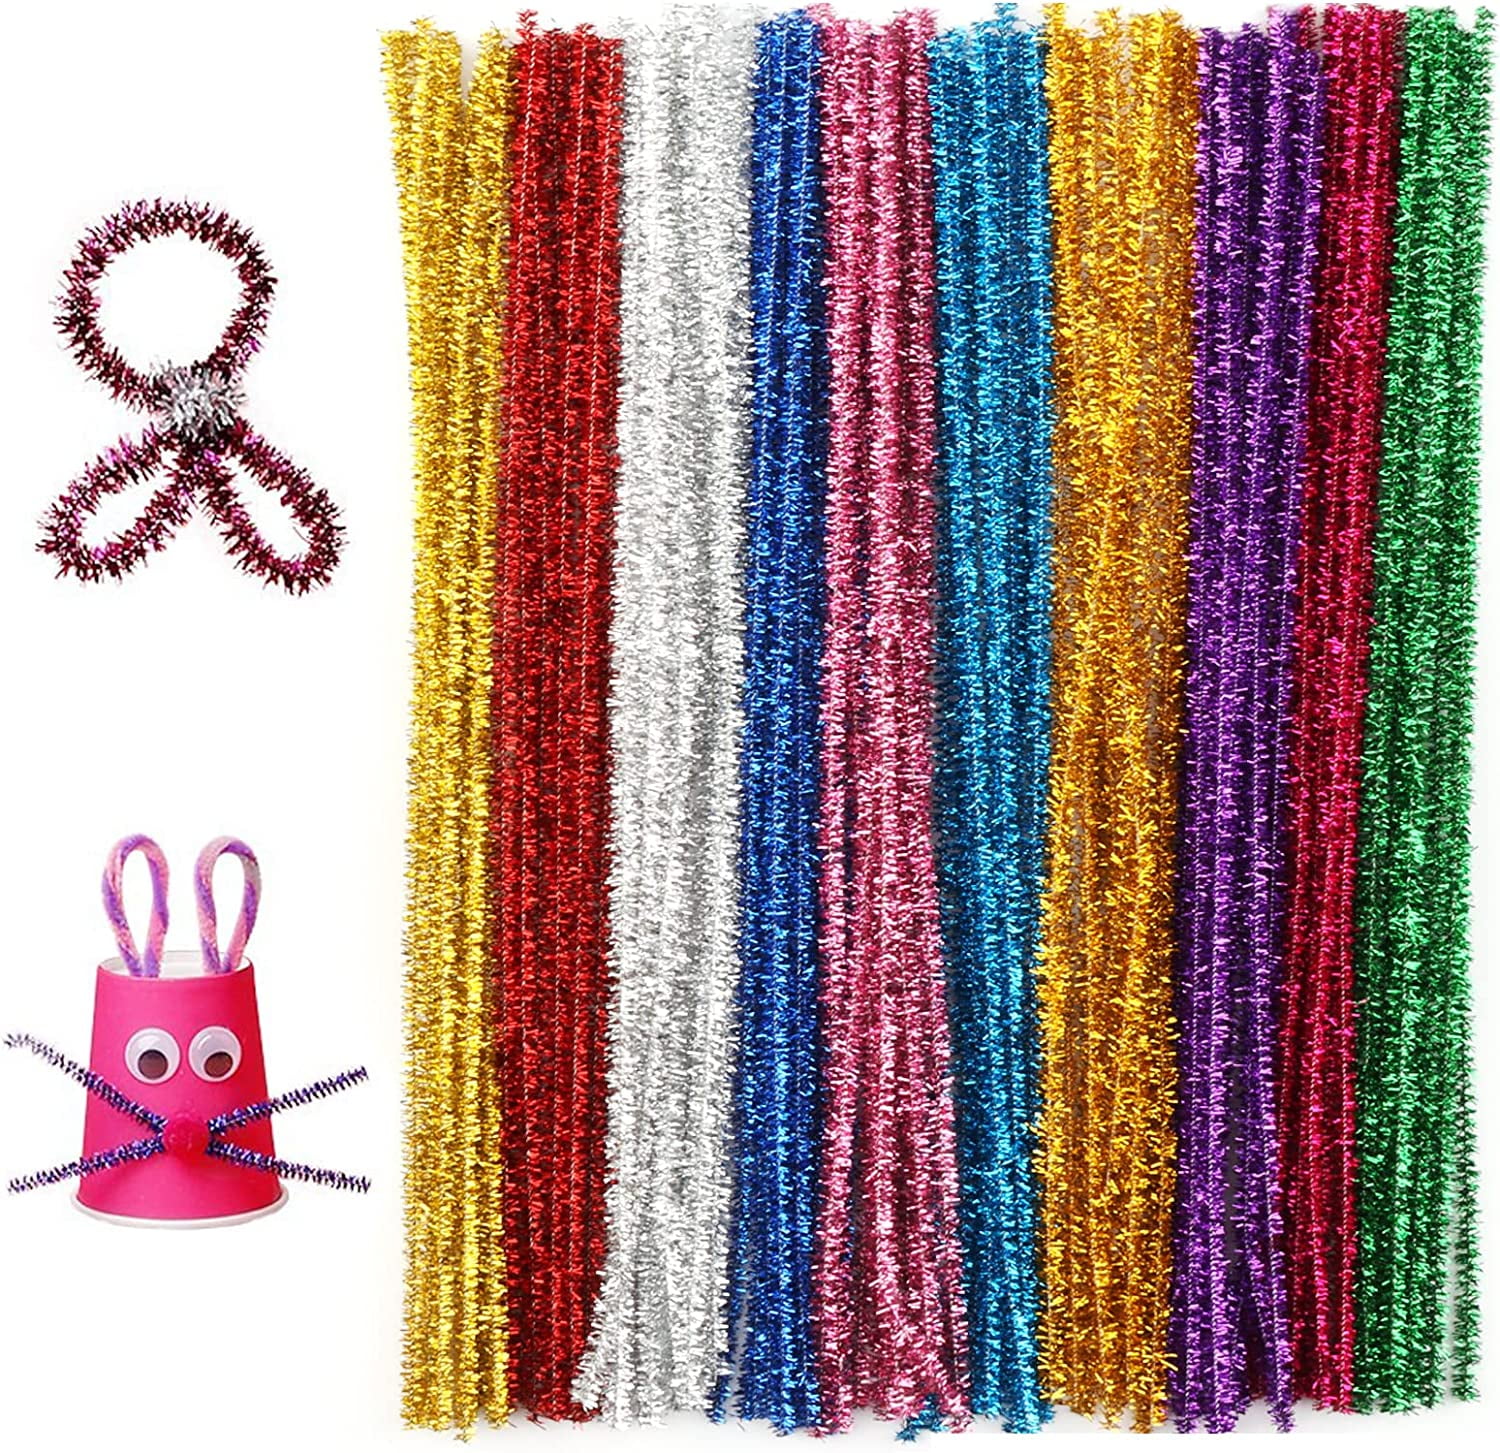 12 PLAIN Chenille ( PIPE CLEANER ) 6MM Stems Choose Color & Package Amount